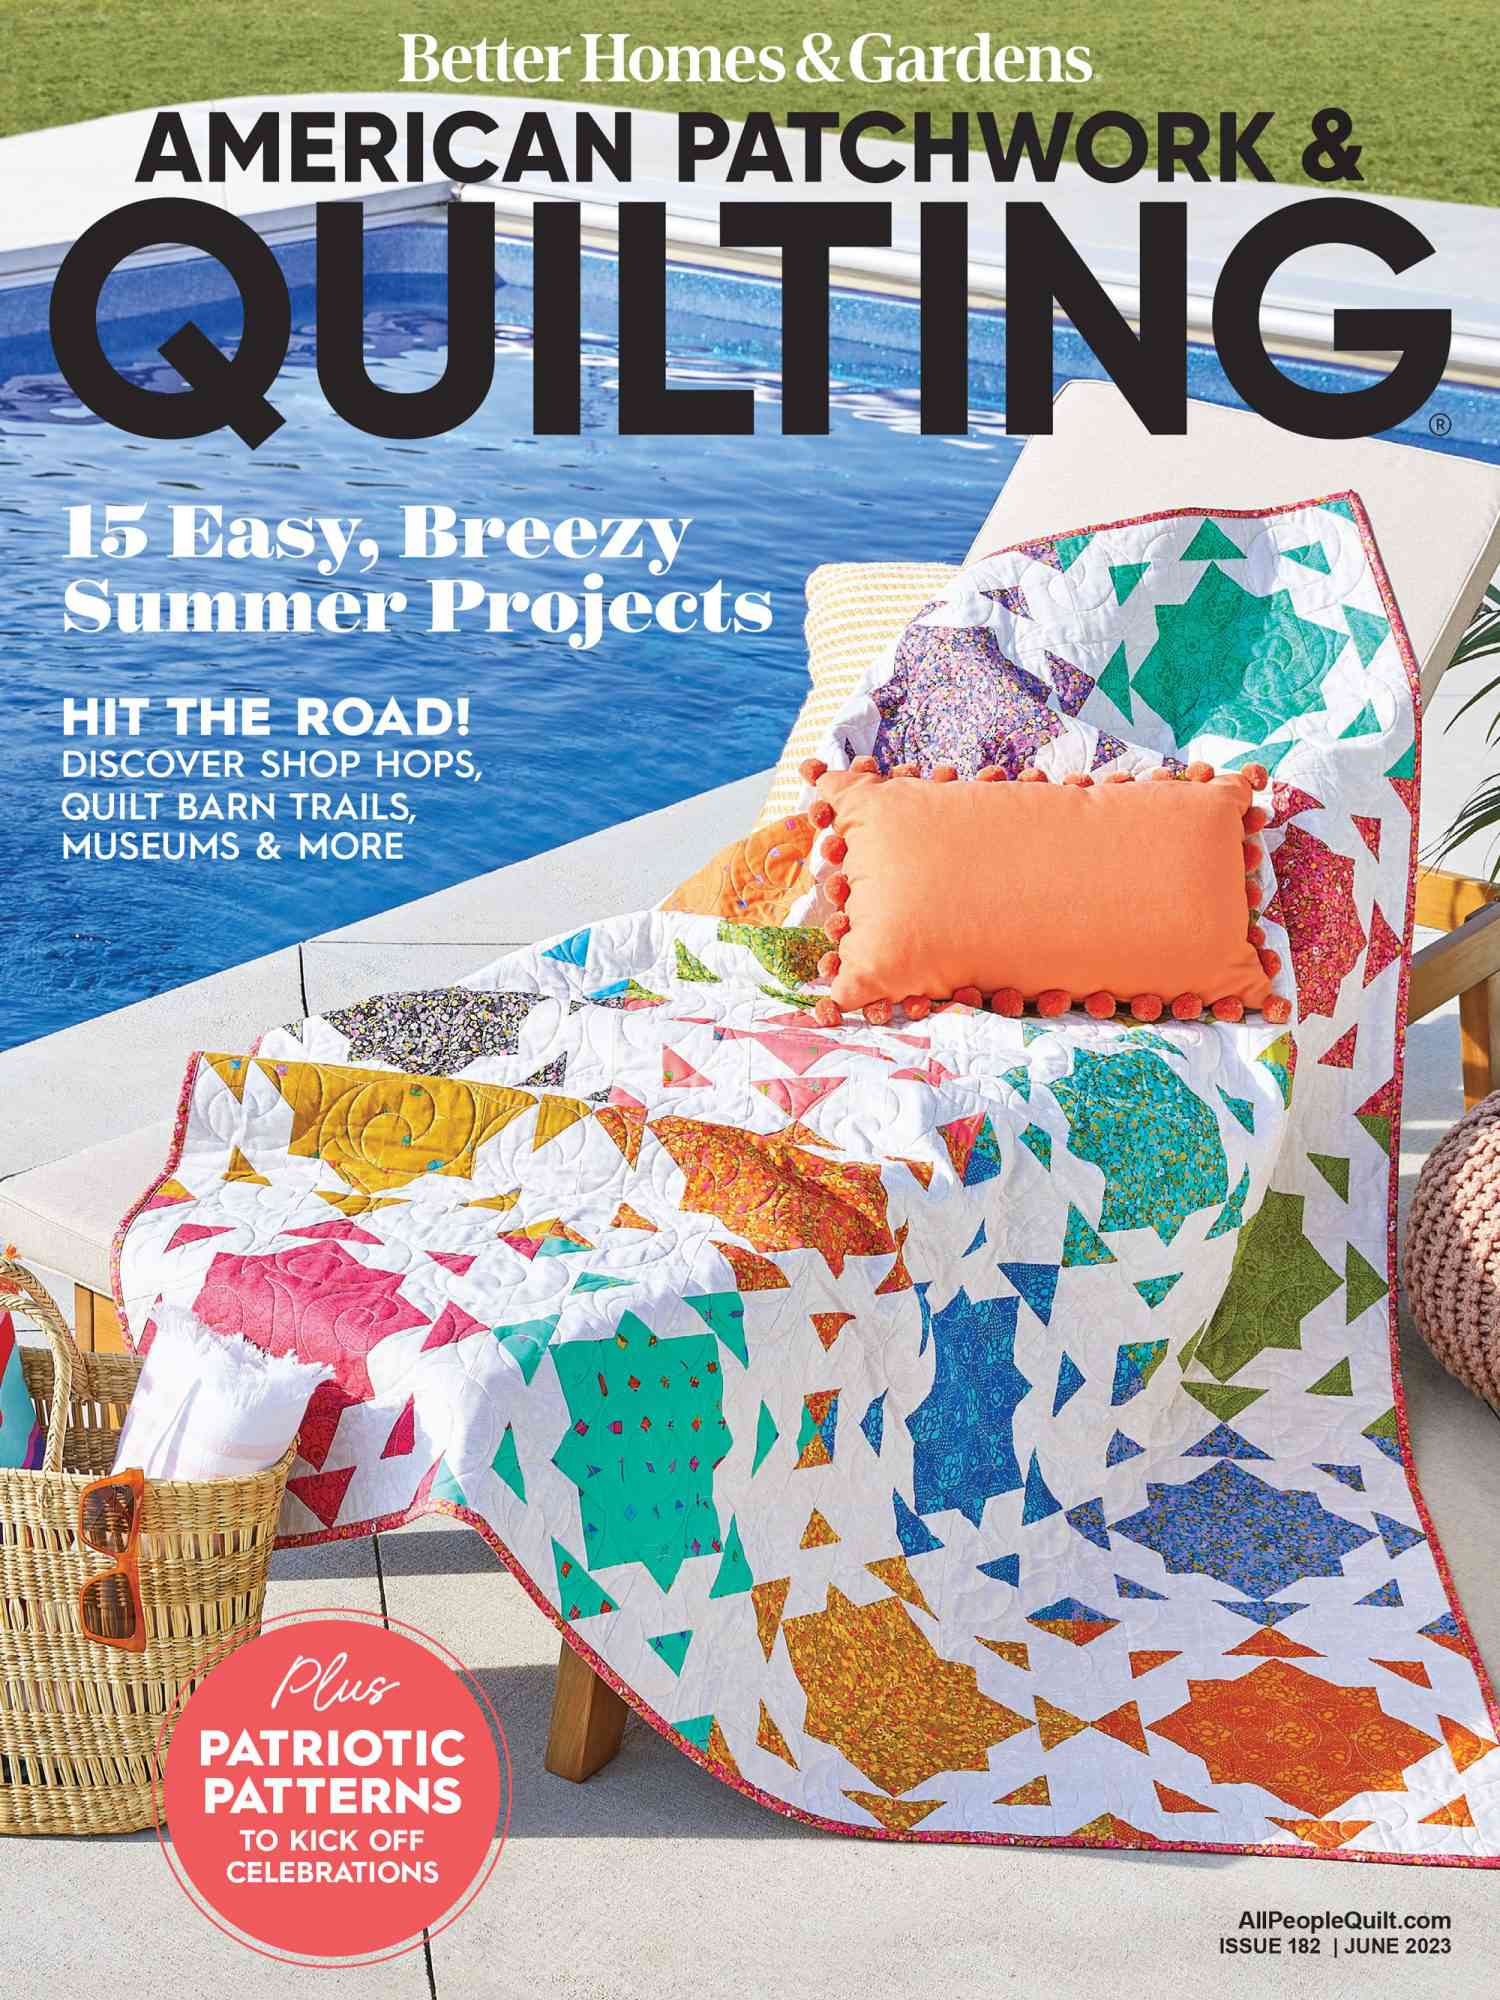 American Patchwork & Quilting June 2023 Cover